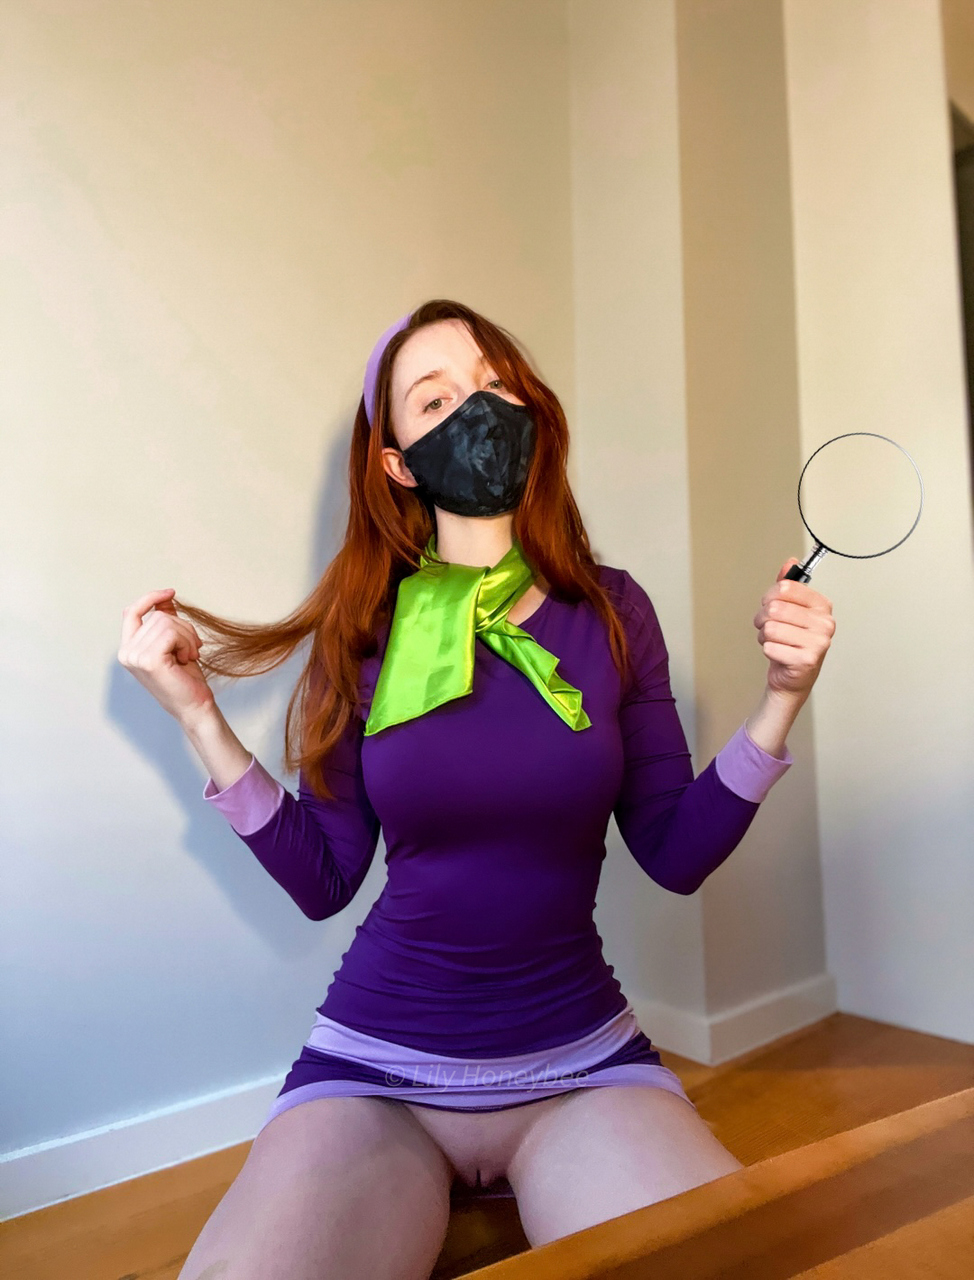 Daphne Blake From Scooby Doo By Lilyhoneybe